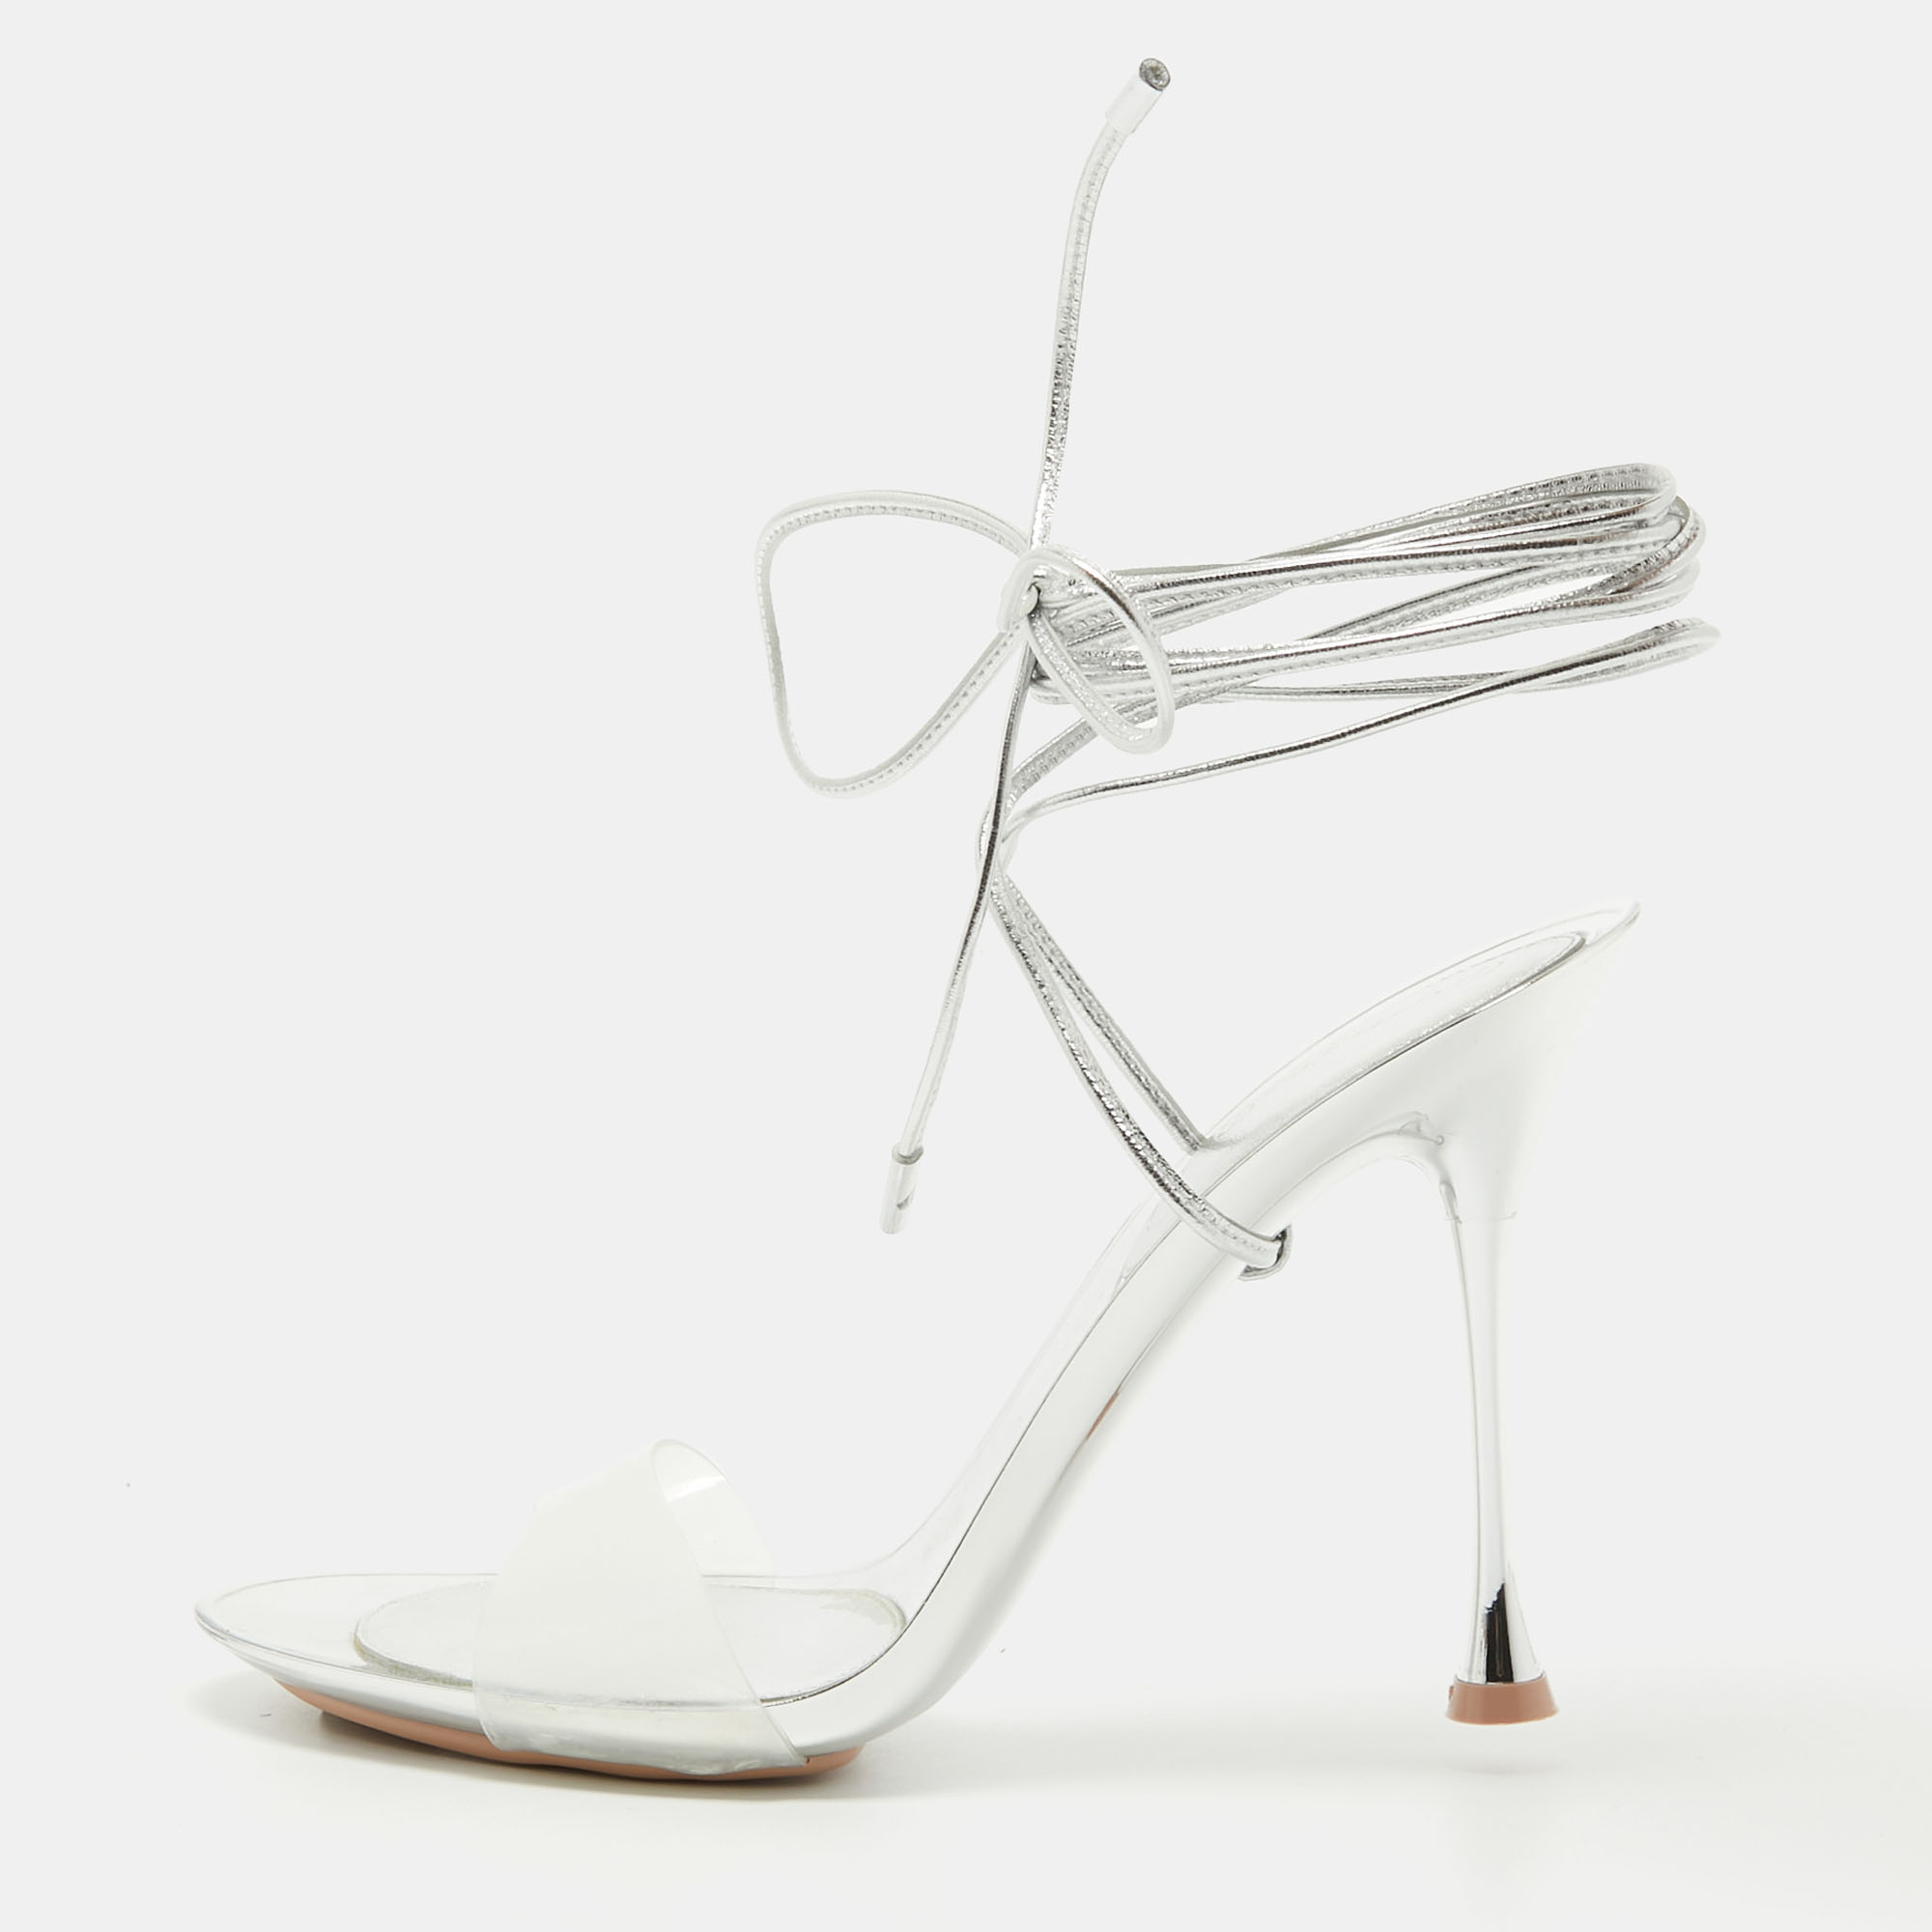 Gianvito rossi transparent pvc and silver leather spice sandals size 37.5